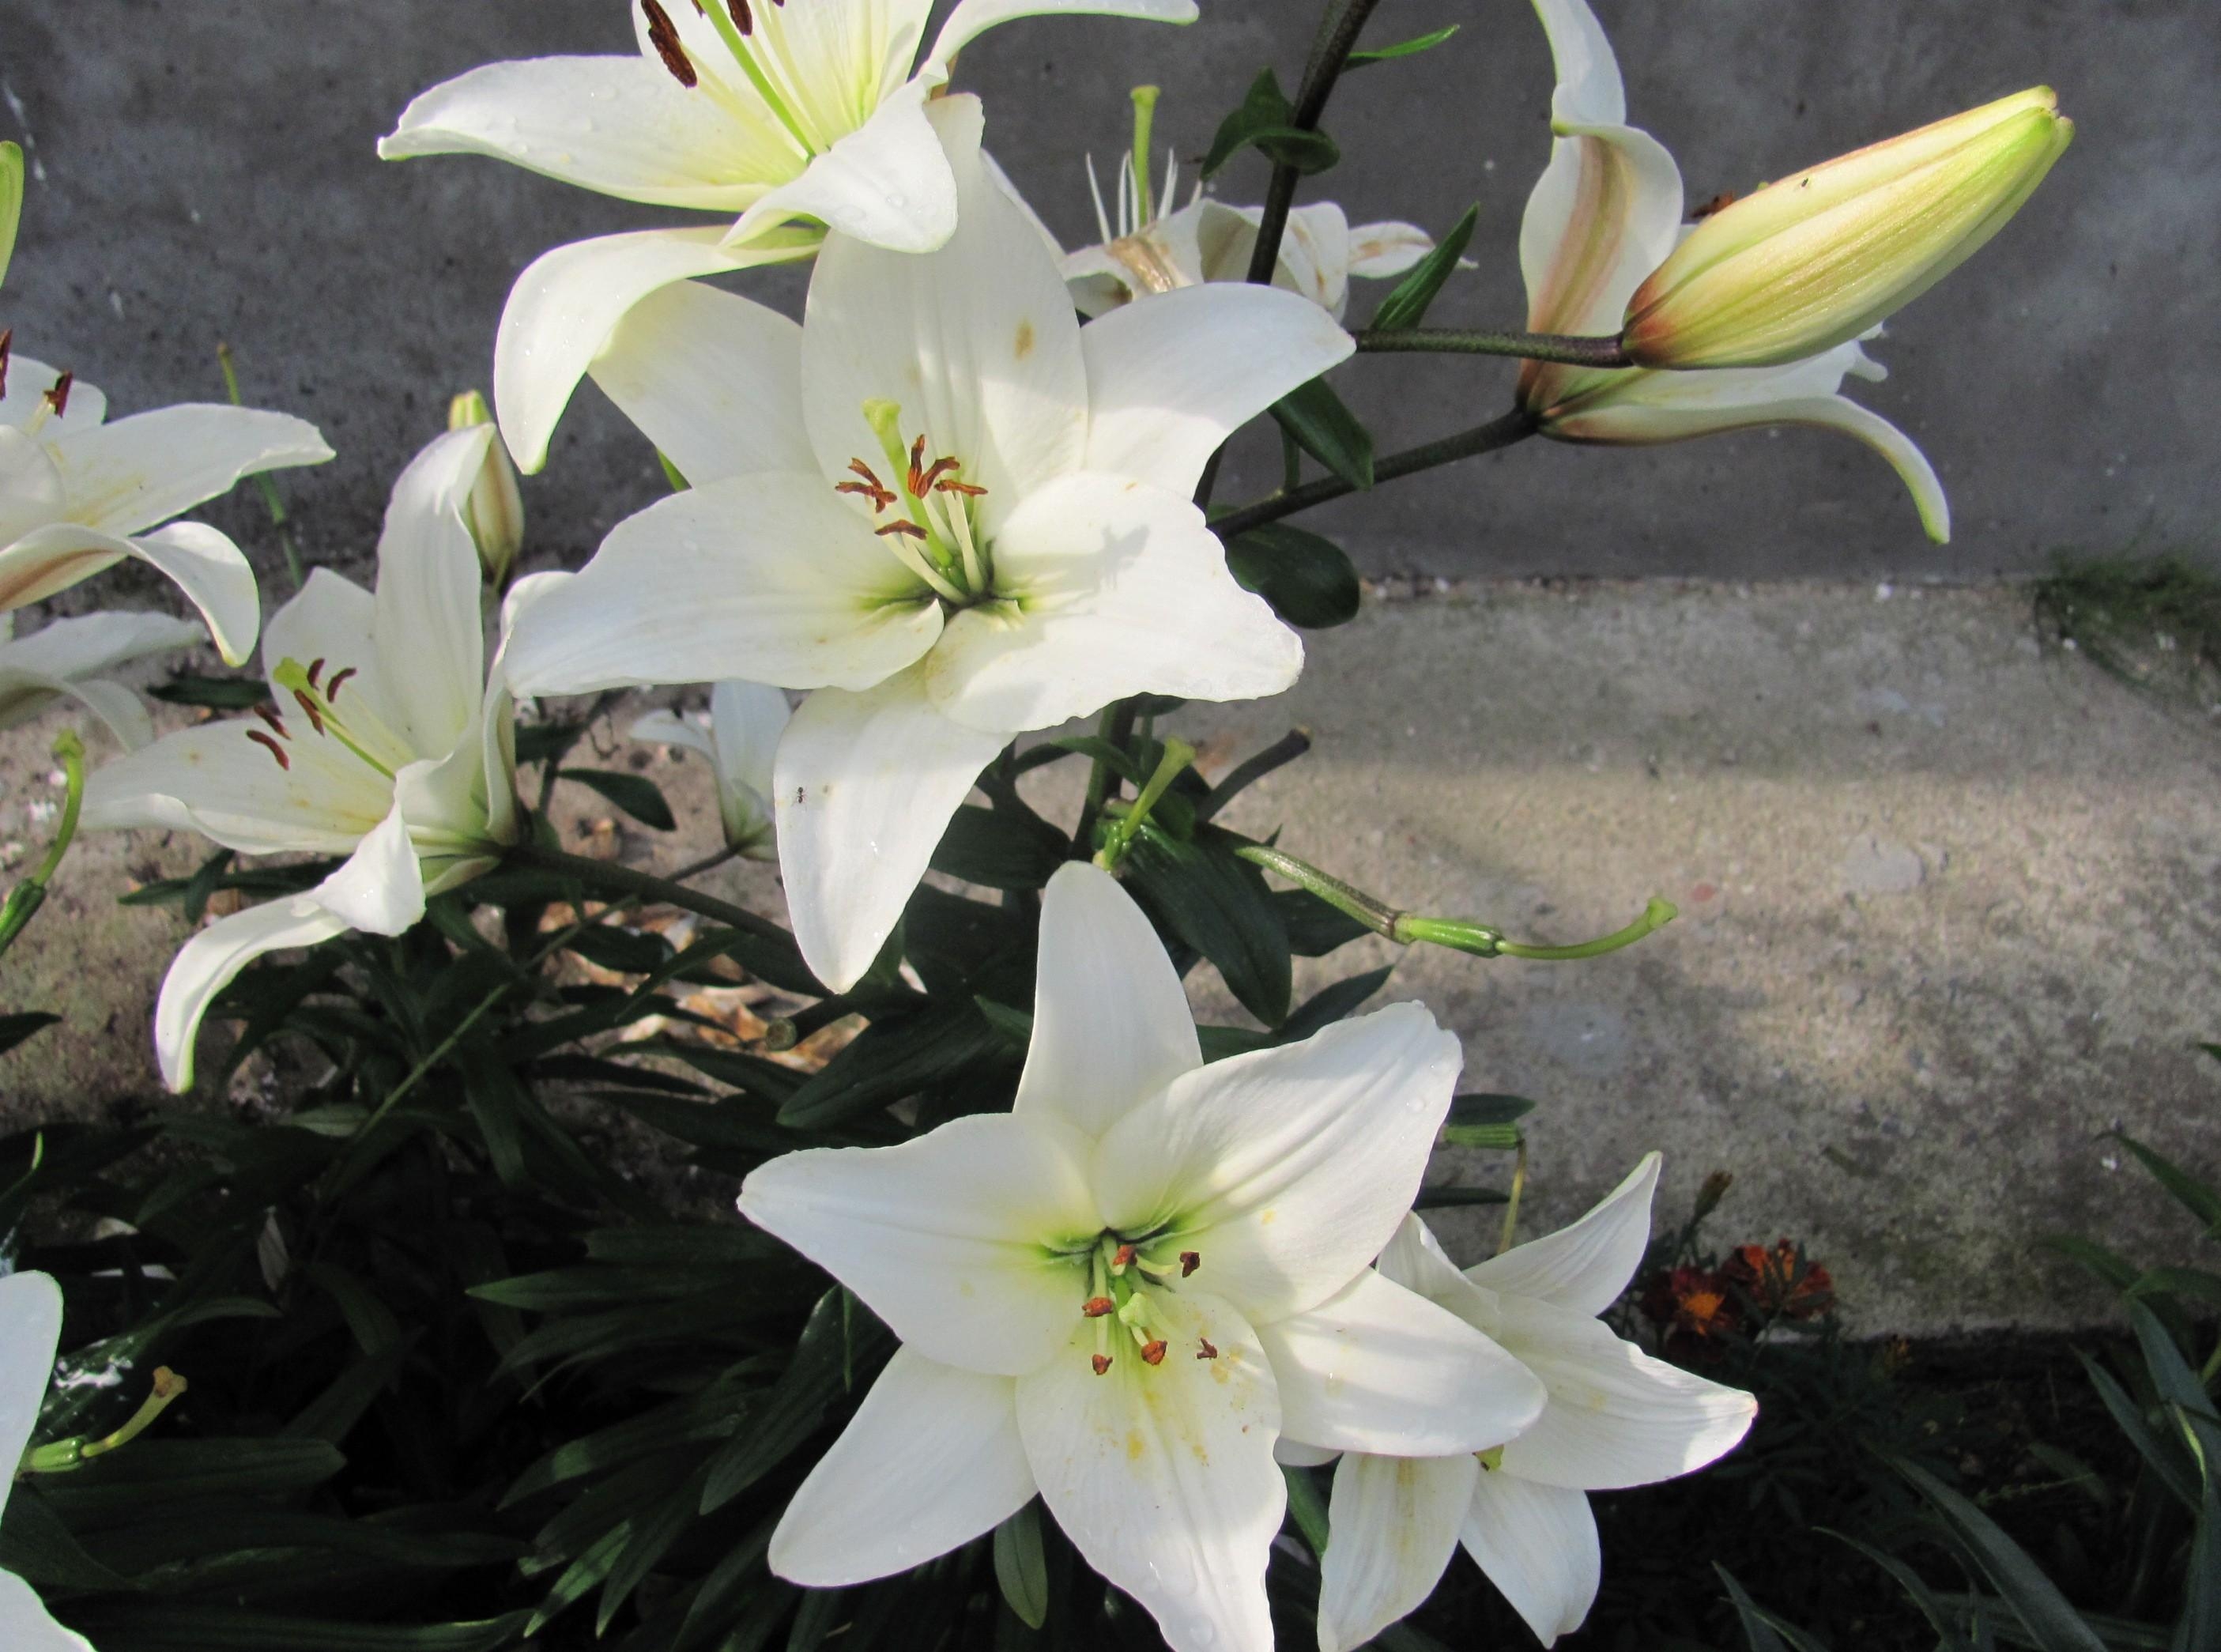 lilies, snow white, flowers, white, bud, greens, flower bed, flowerbed QHD